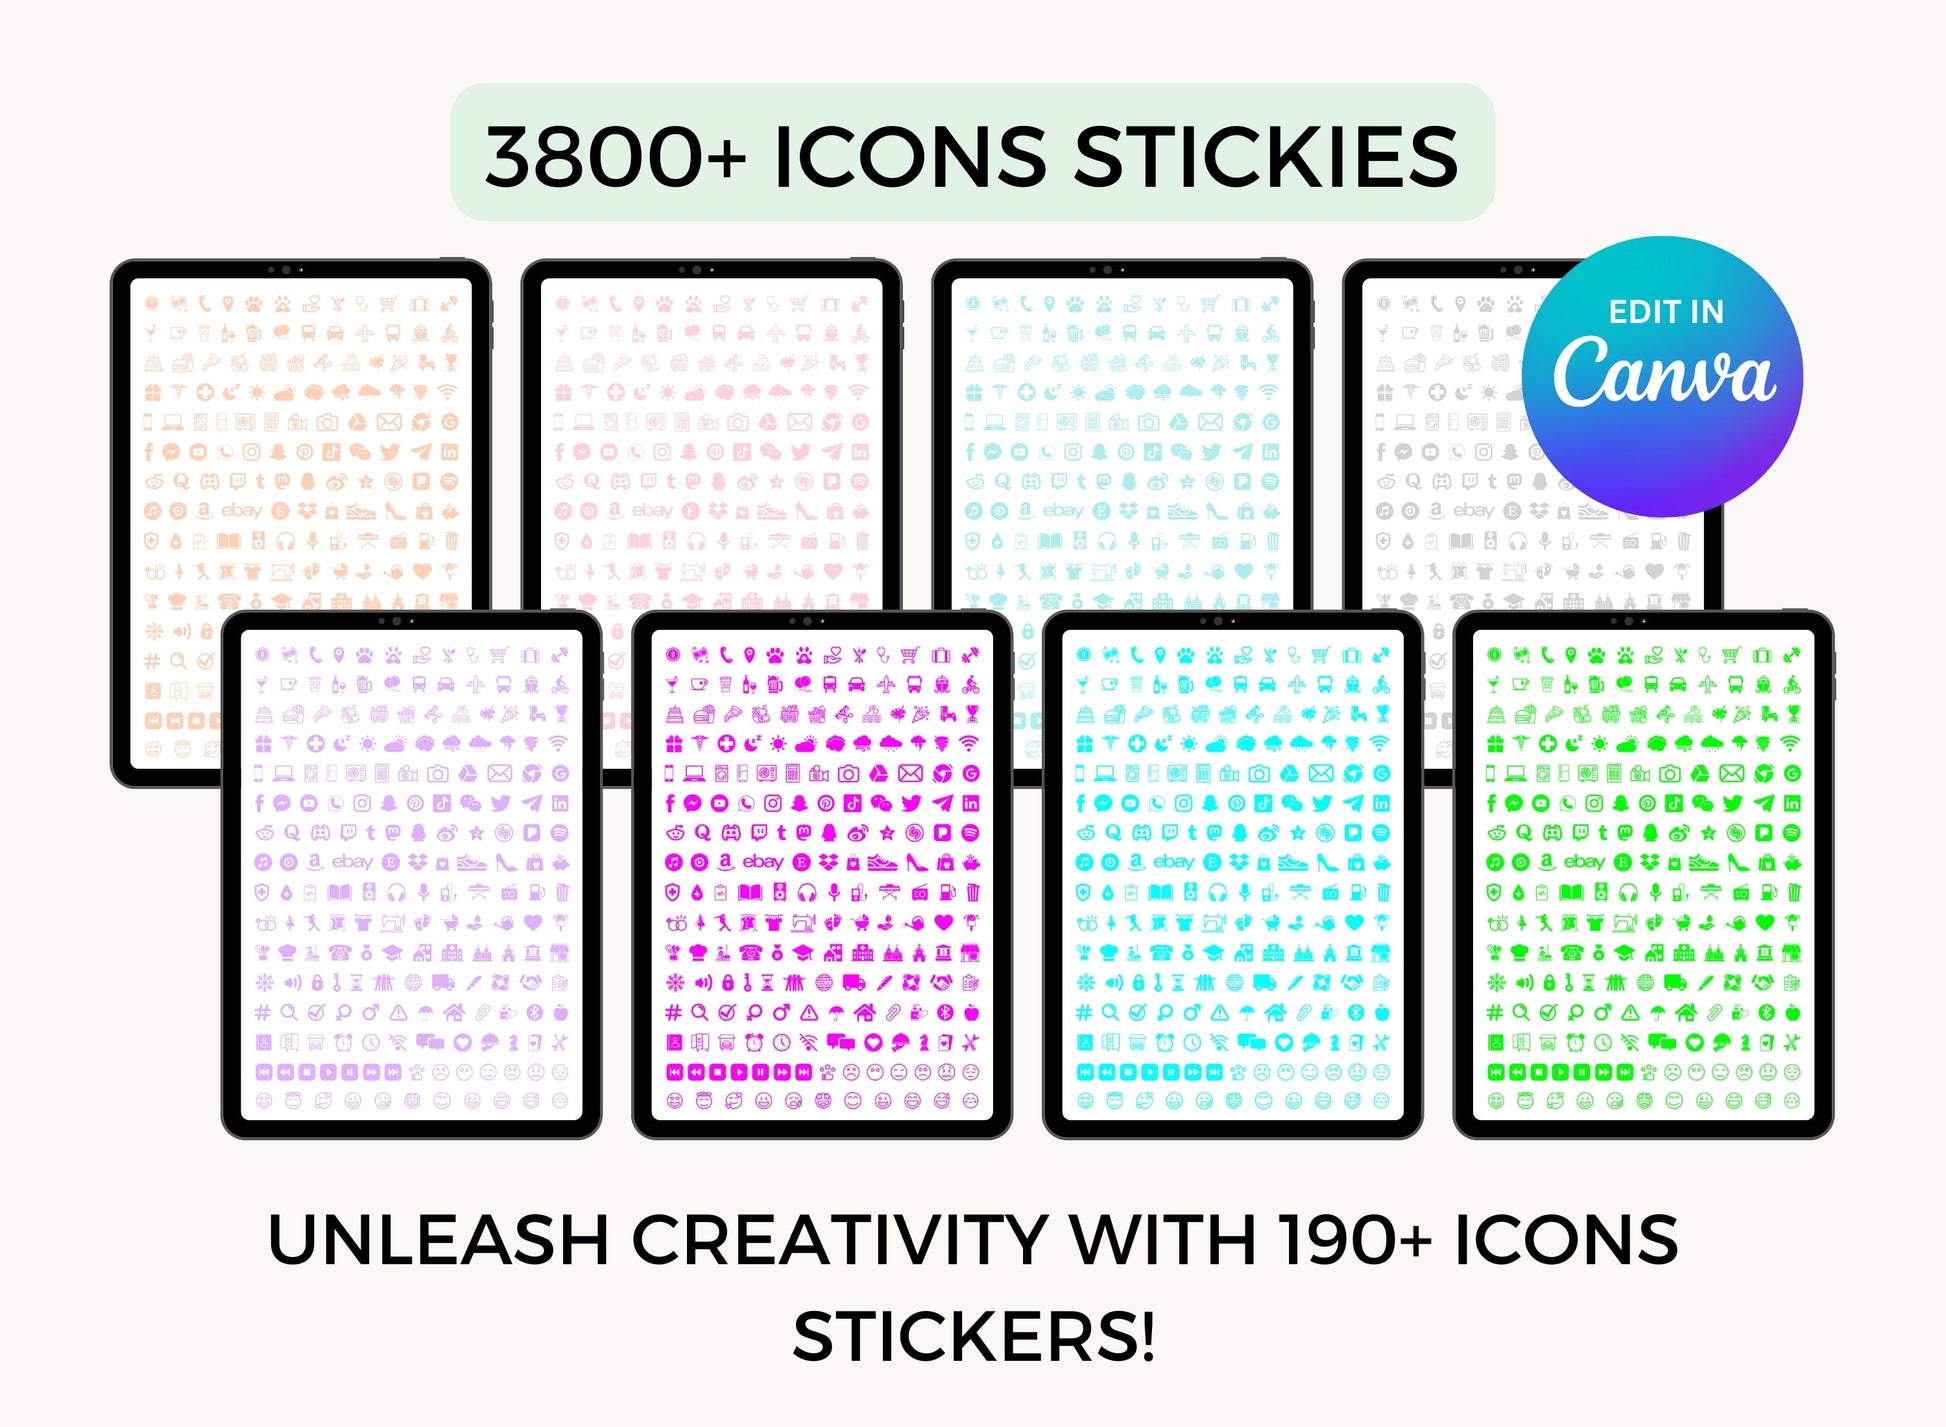 Exclusive Sticker Graphics, Editable Stickers, Editable Sticker Bundle, Downloadable Sticker Pack, DIY Crafts, DIY Crafting Assets, Digital Stickers, Digital Scrapbooking Elements, Digital Planner Stickers, Digital Crafting Supplies, Customizable Sticker Collection, Customizable Designs